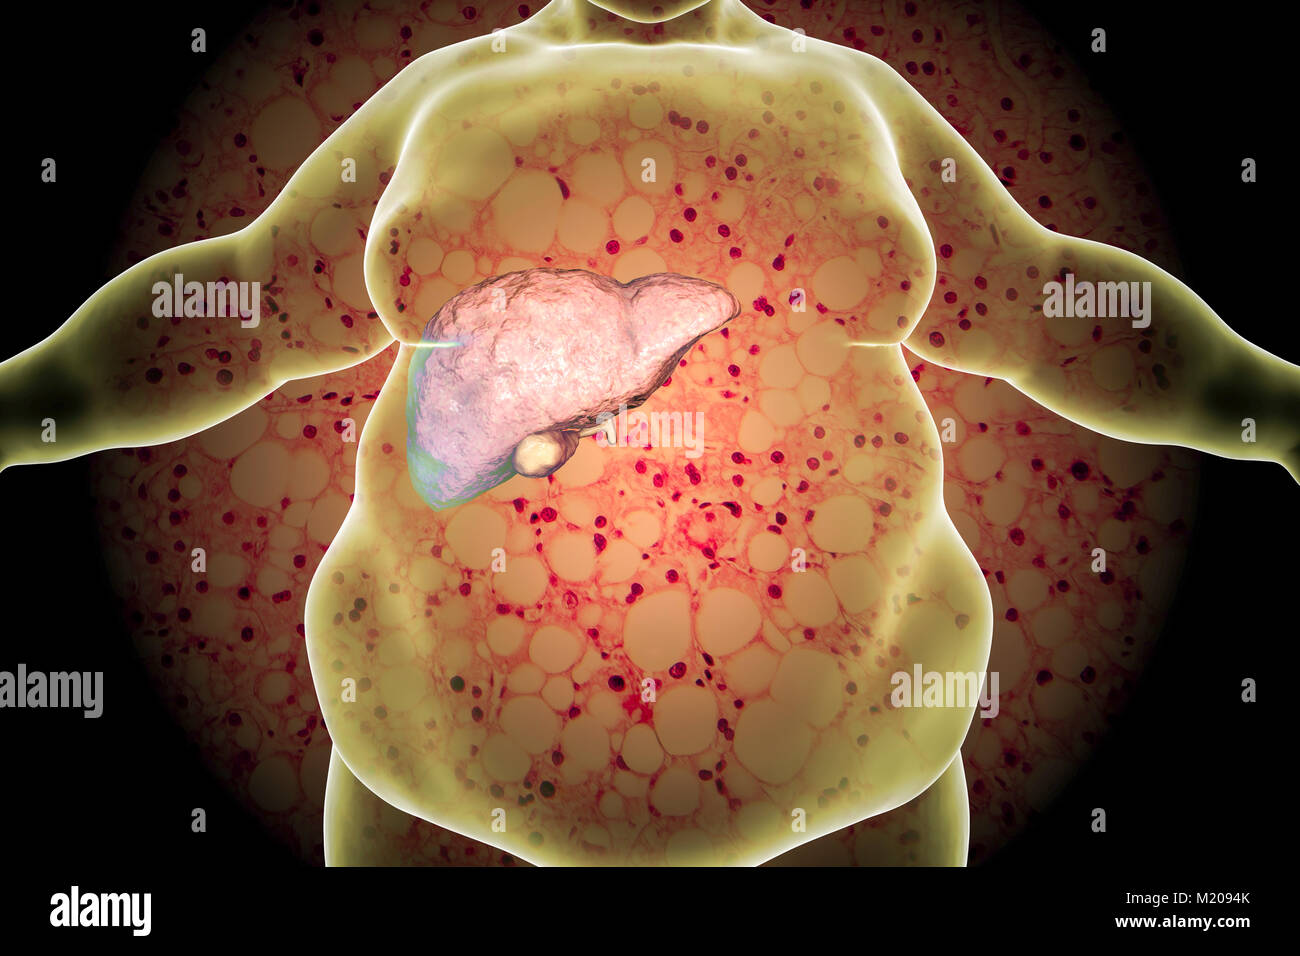 Fatty liver in obese person, conceptual illustration. Fatty liver is commonly associated with alcohol or metabolic syndrome (diabetes, hypertension and obesity), but can also be due to any one of many causes. Fatty liver disease is a reversible condition wherein large vacuoles of fat (pale yellow circles) accumulate in liver cells. Stock Photo